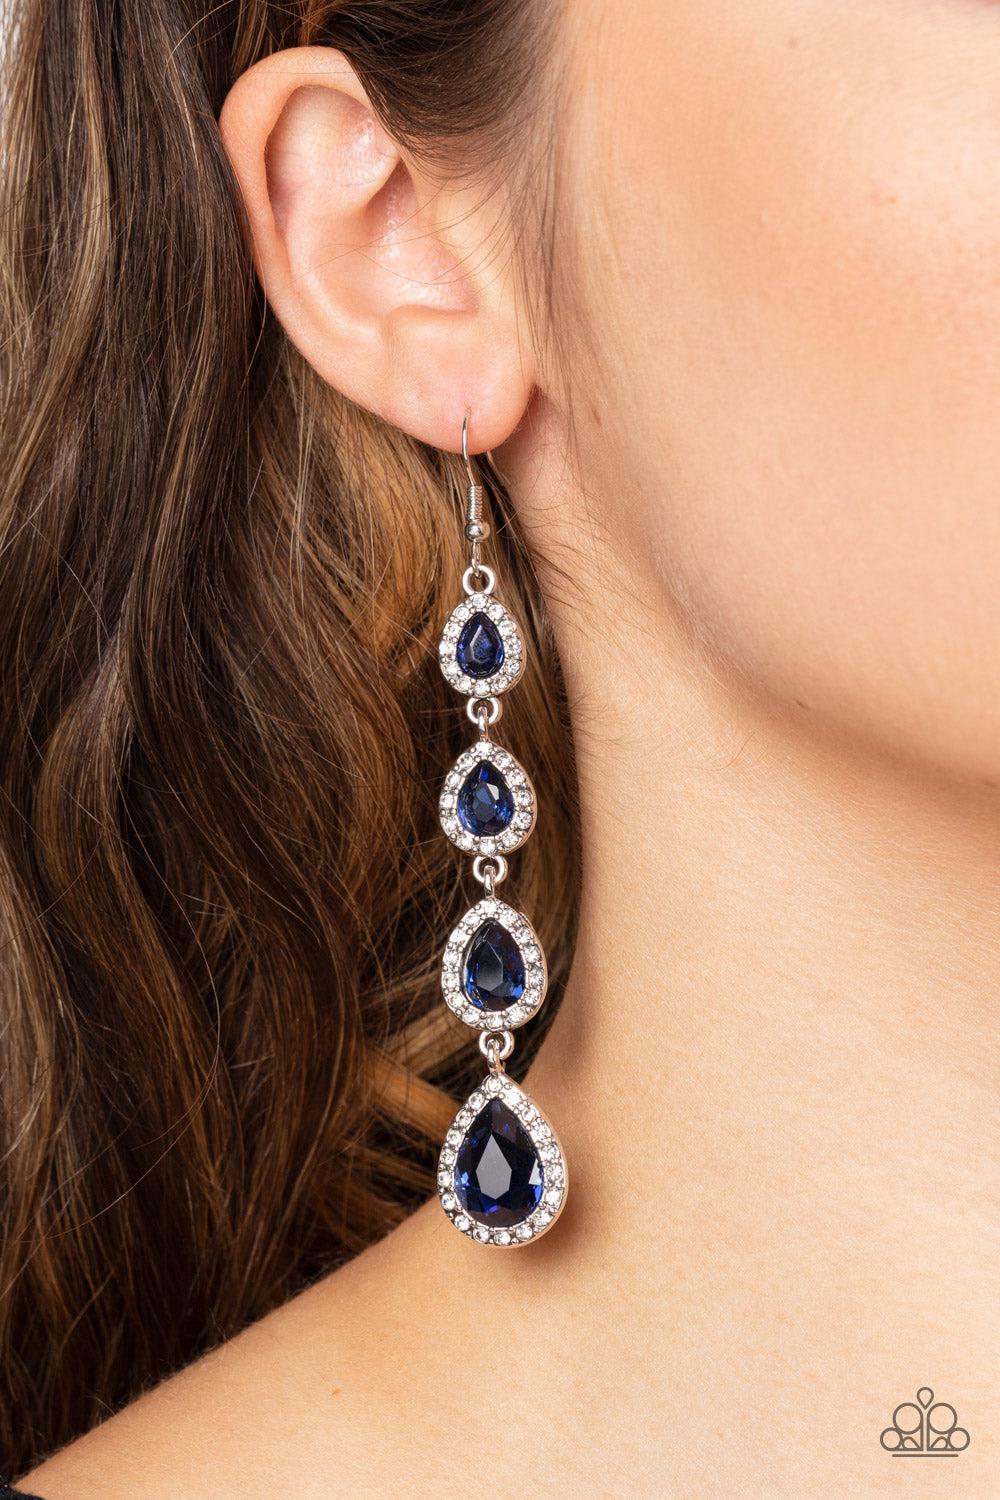 Confidently Classy Blue Rhinestone Earrings - Paparazzi Accessories-on model - CarasShop.com - $5 Jewelry by Cara Jewels